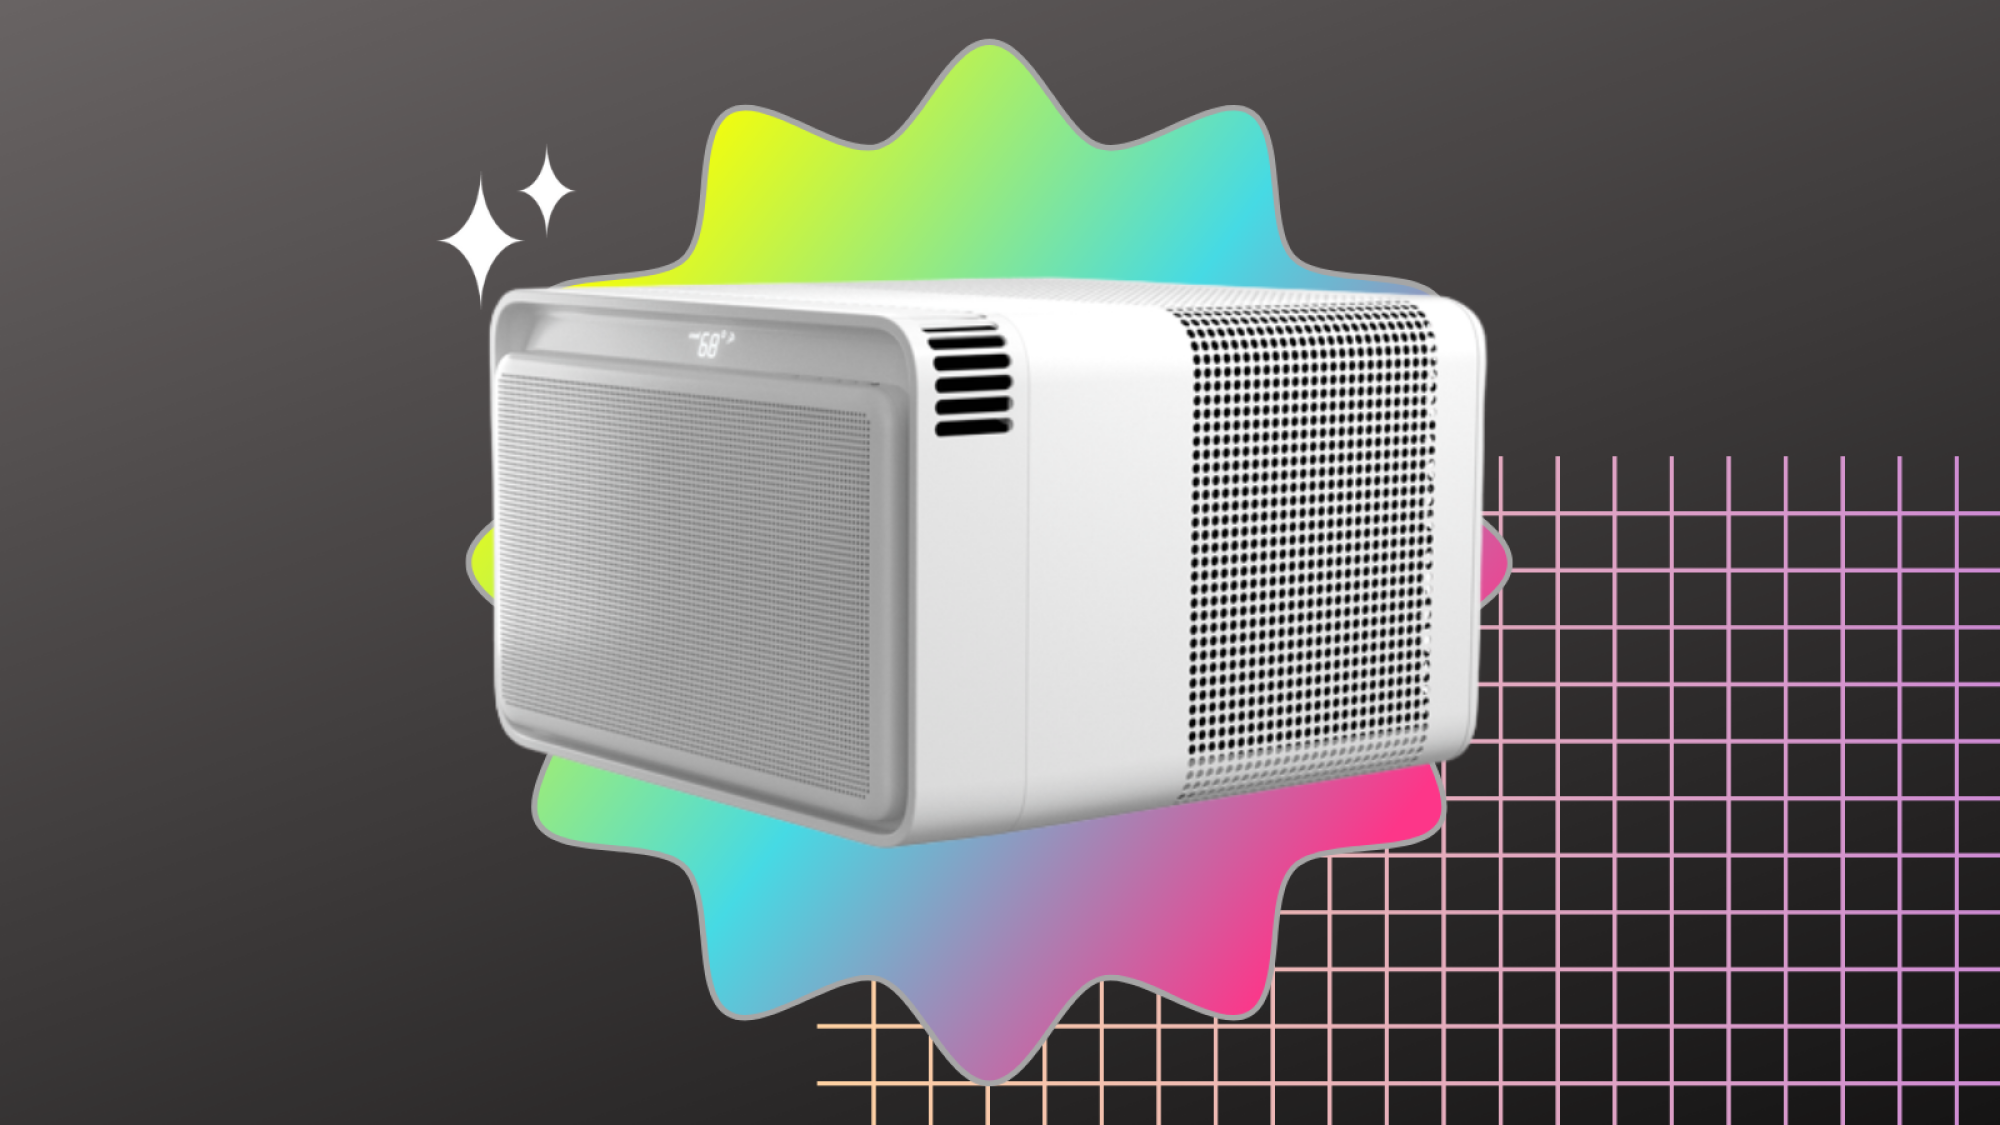 Windmill air conditioning unit on gray graphic with colorful shapes